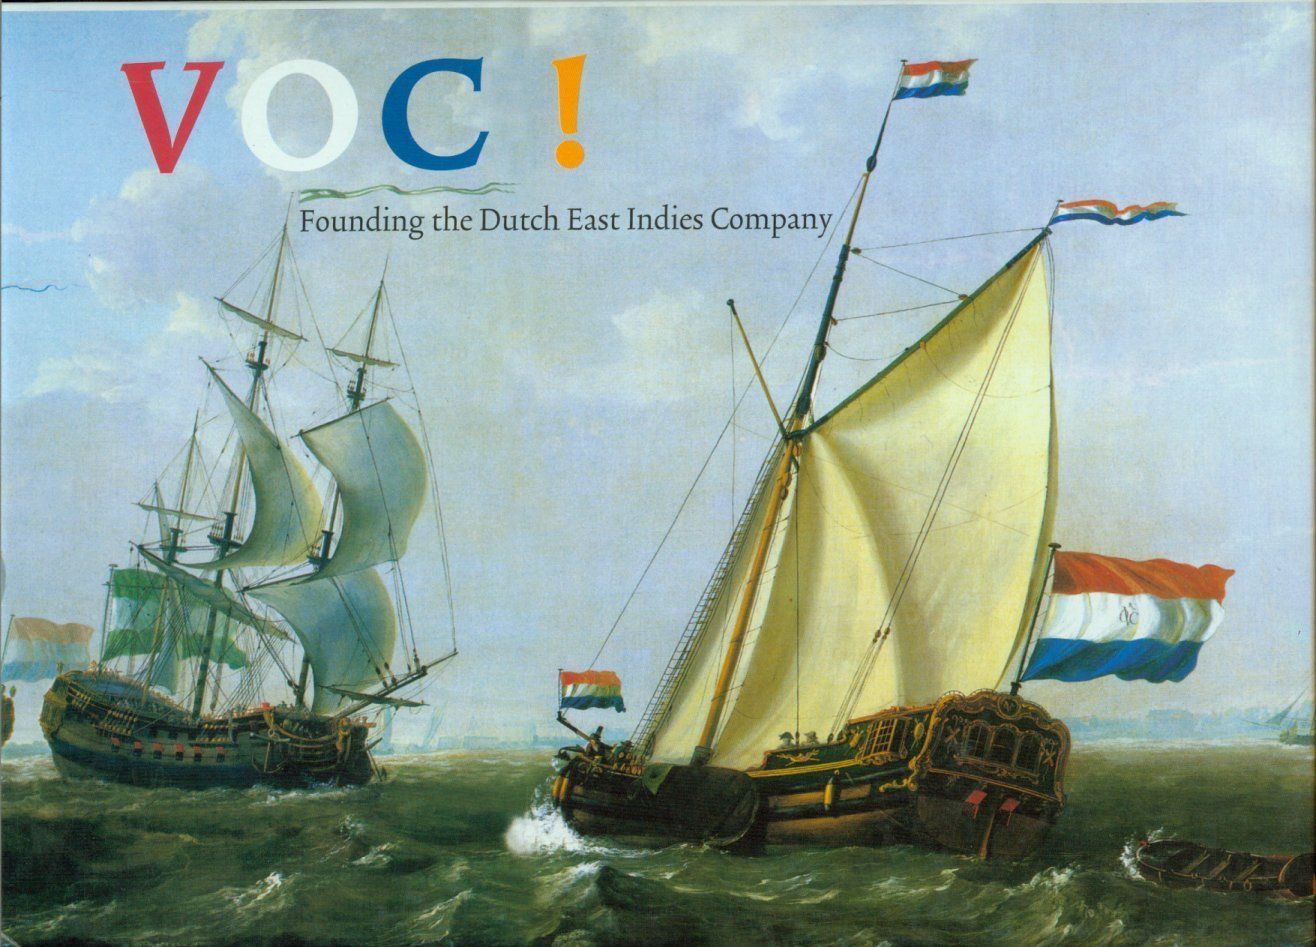 VOC! Founding the Dutch East Indies Company